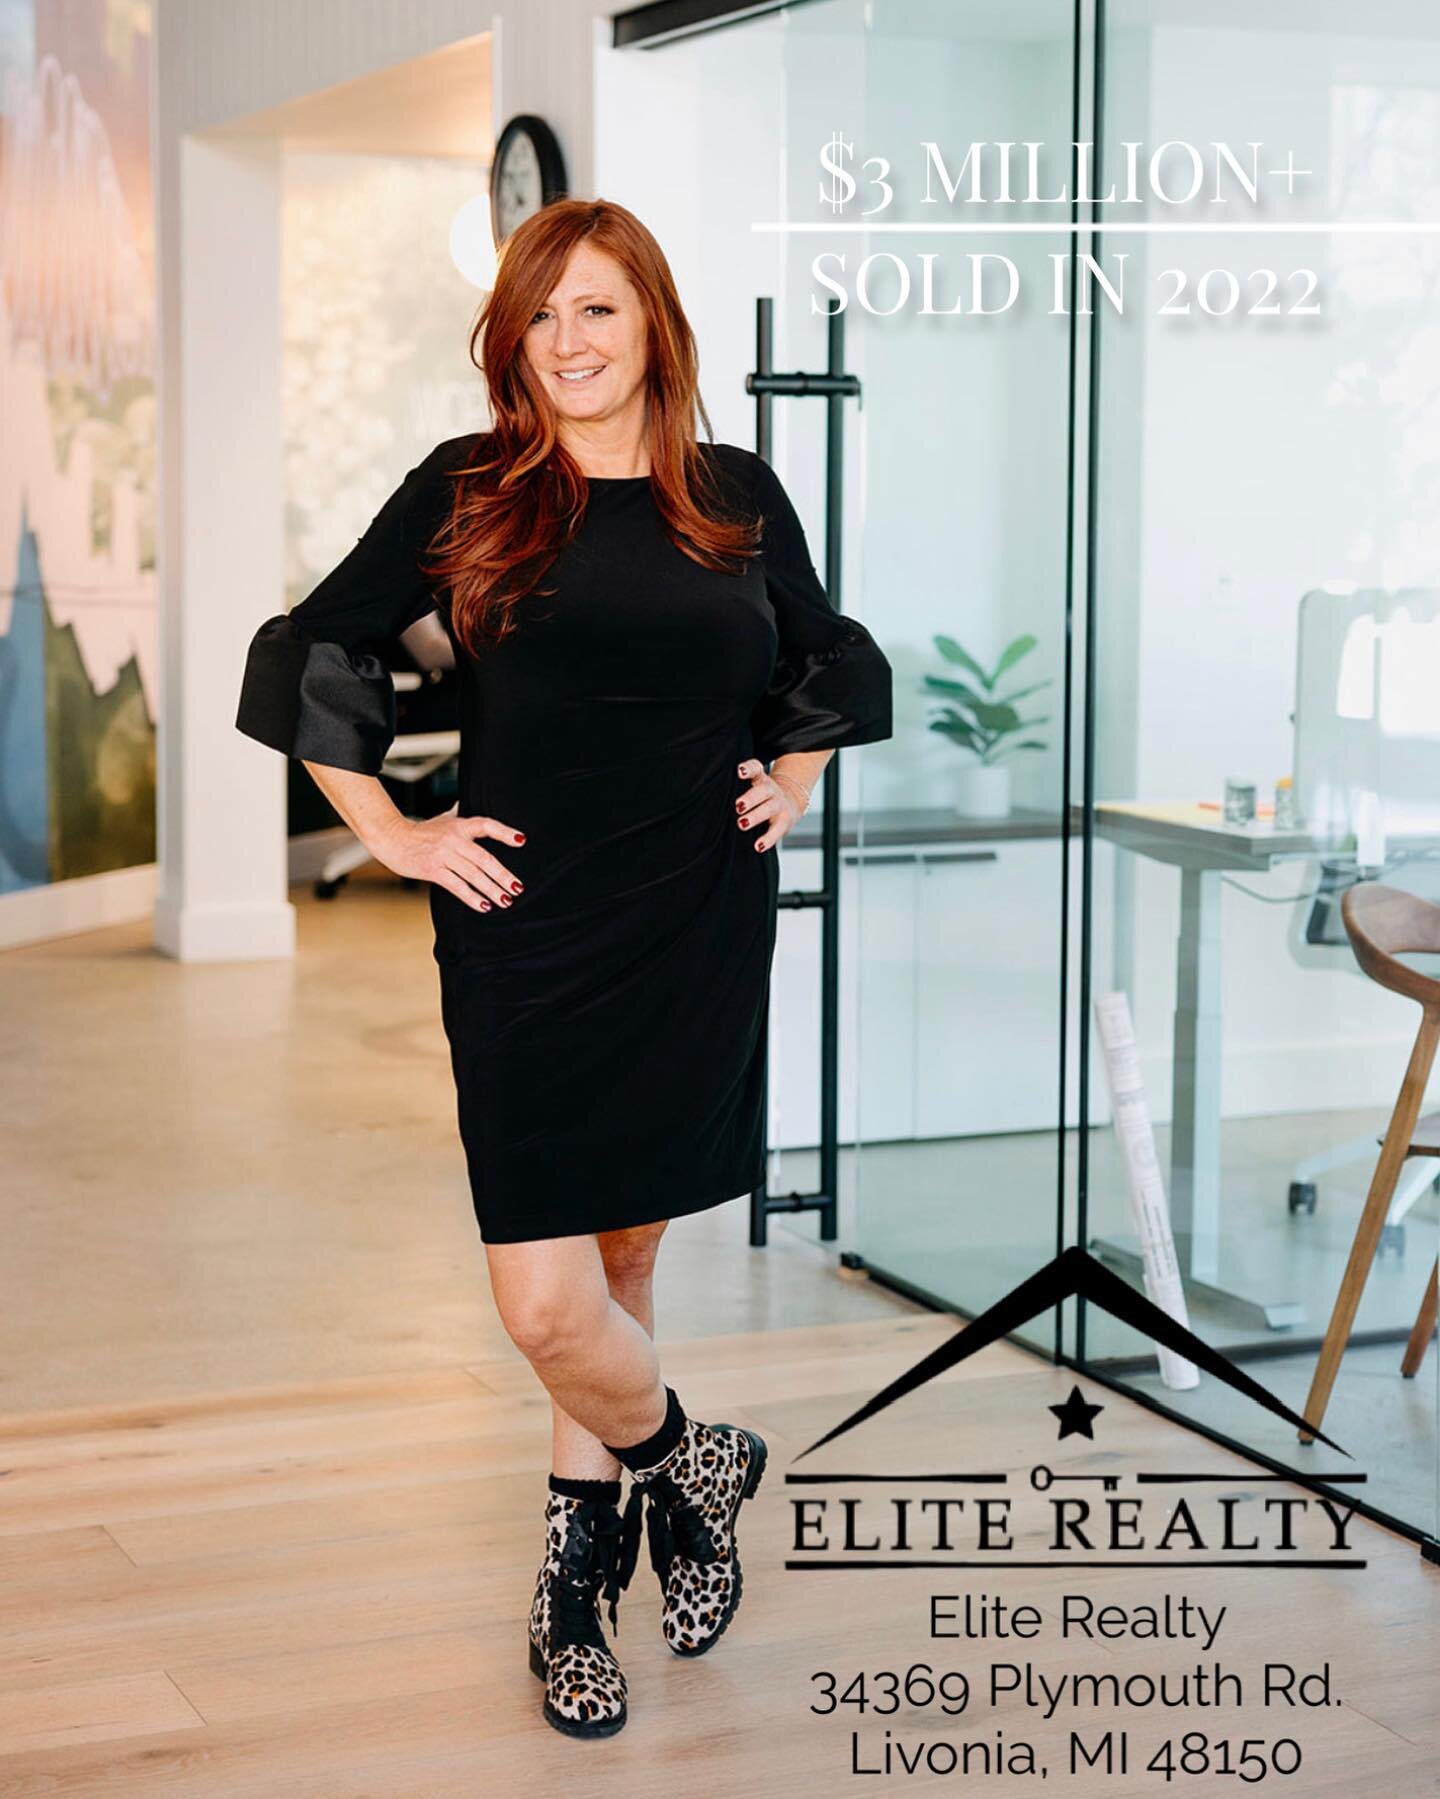 Let me introduce myself...

For those who do not know me yet... Hi, I'm Tracy 👋🏼 

I'm a local Metro Detroit Realtor with expertise in suburban neighborhoods, Detroit investment, and second home purchases. Trusted in the local community for many ye